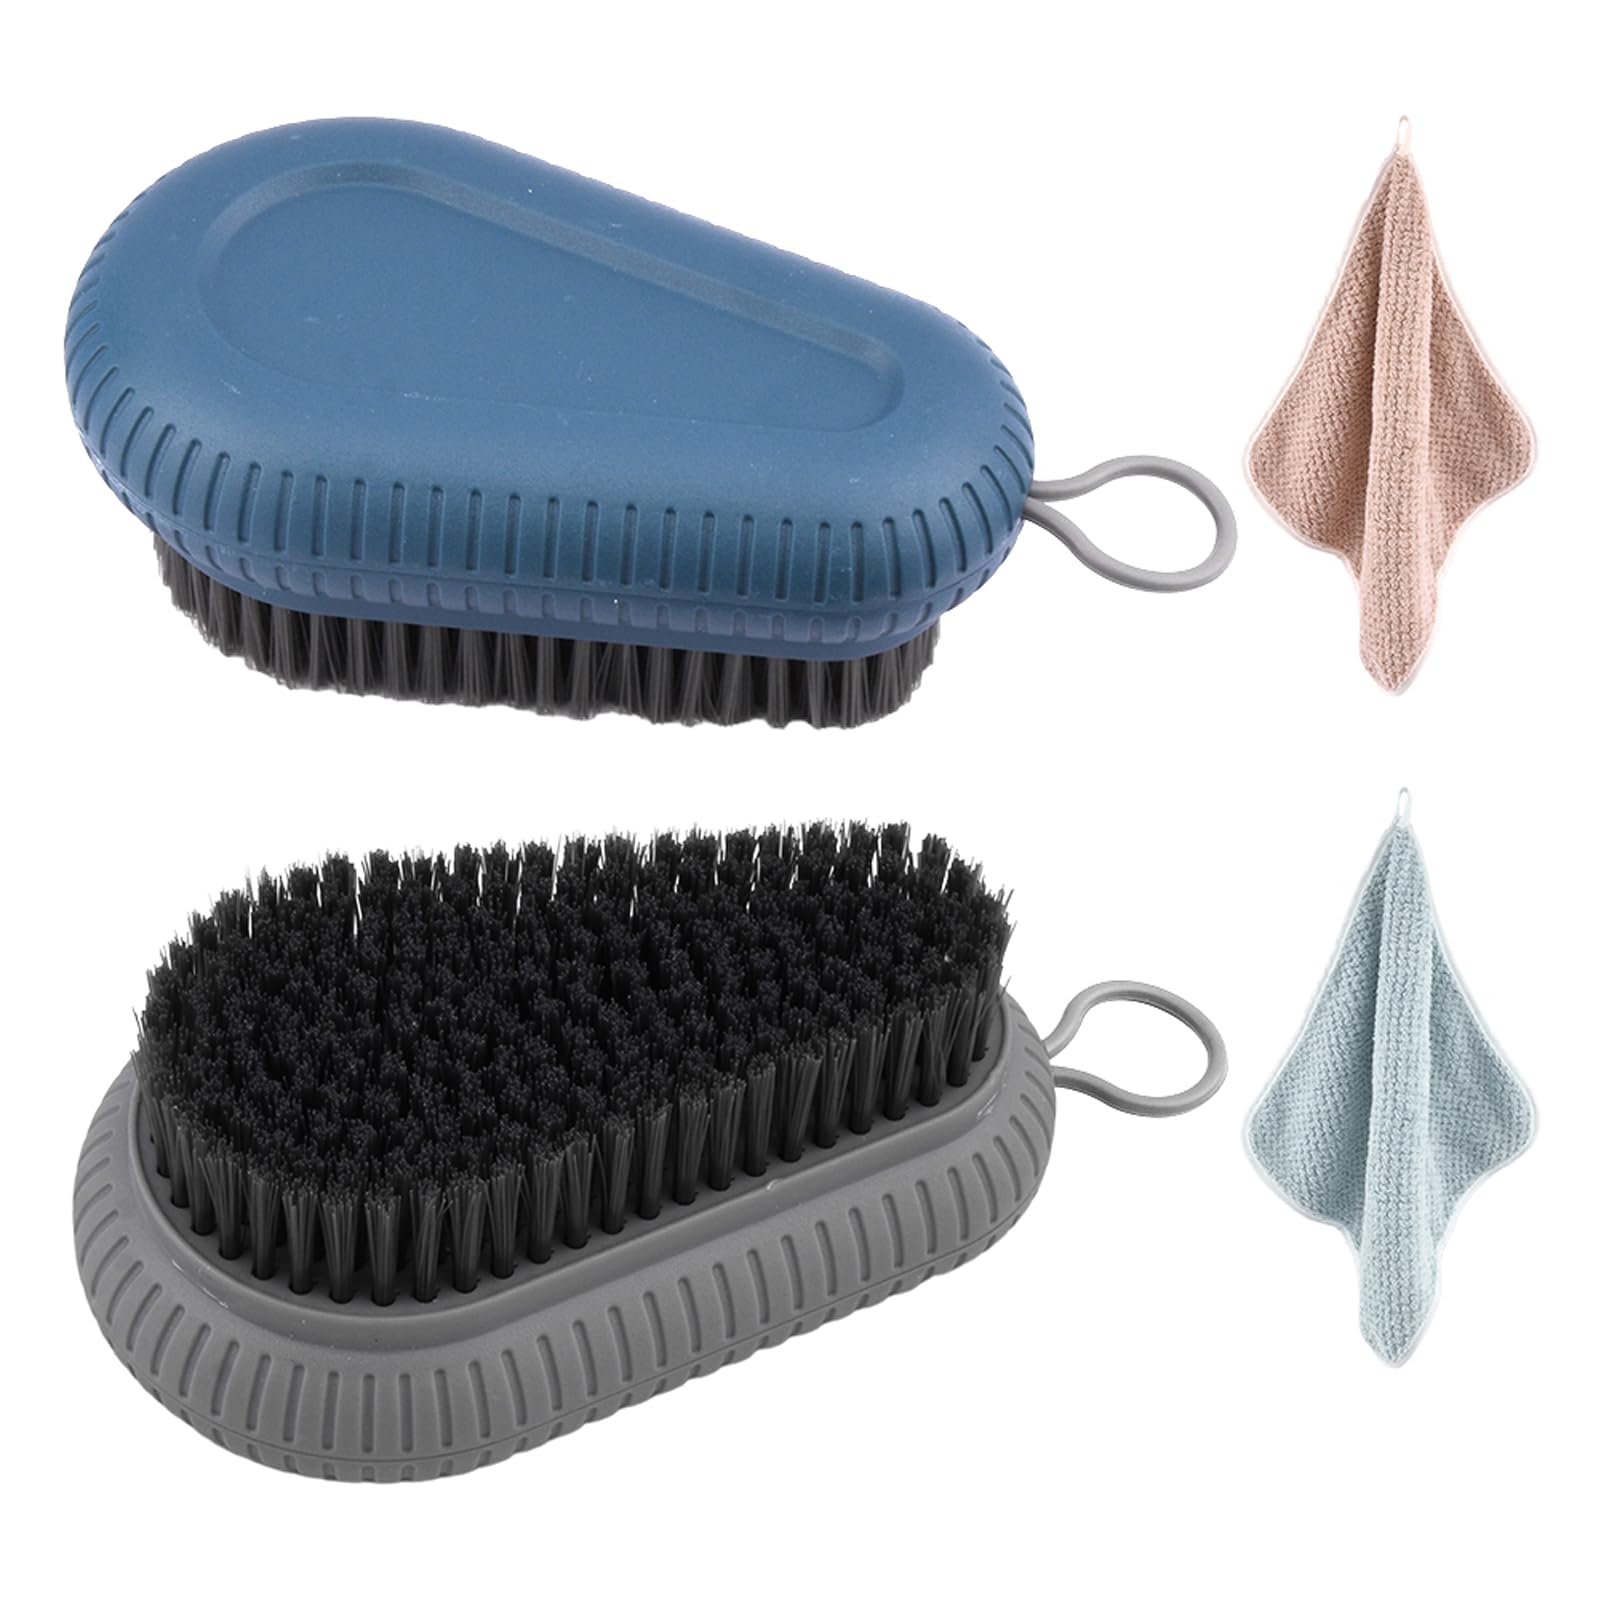 Cleaning brush or cloth